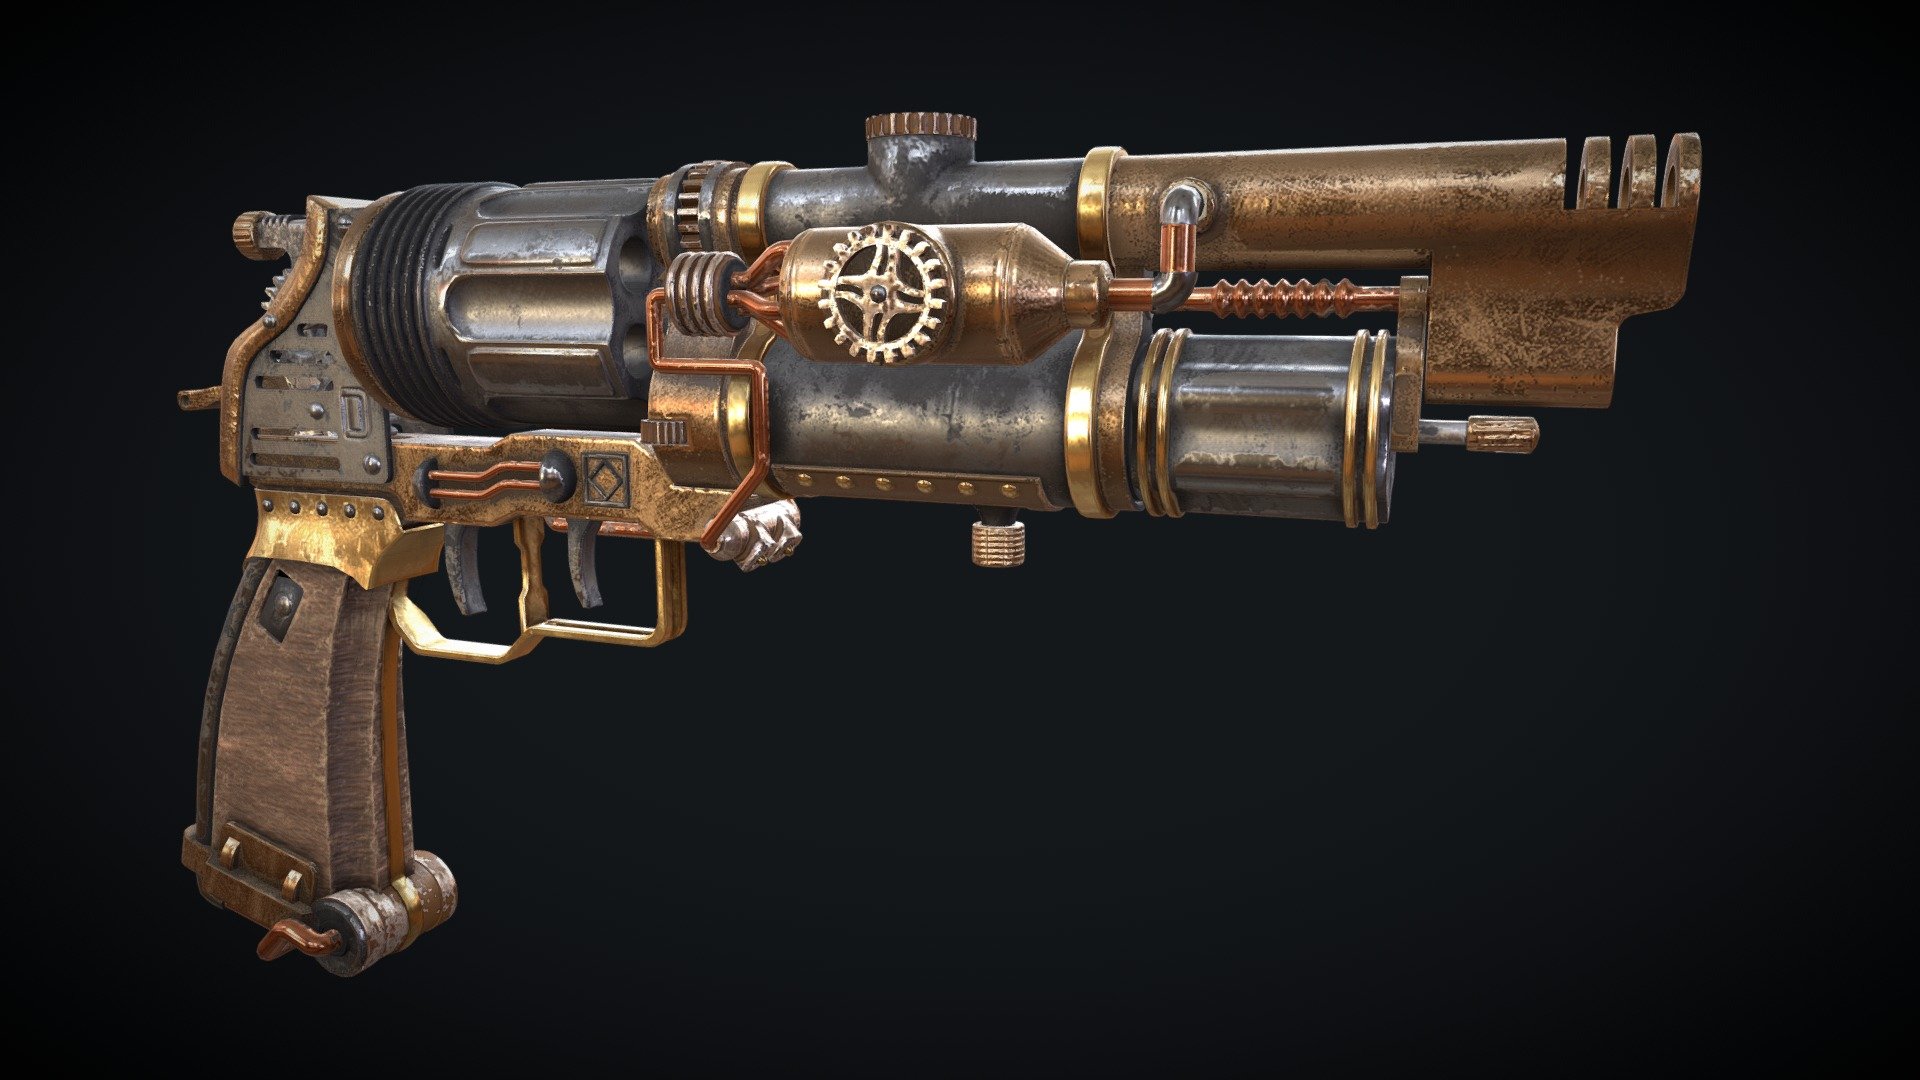 A relic from Steampunk World War I.

You can find high quality renders of this model on my Artstation.

by Eduardo Kuhn - Steampunk Revolver (With Animations) - Download Free 3D model by Eduardo Kuhn (@eduardokuhn) 3d model